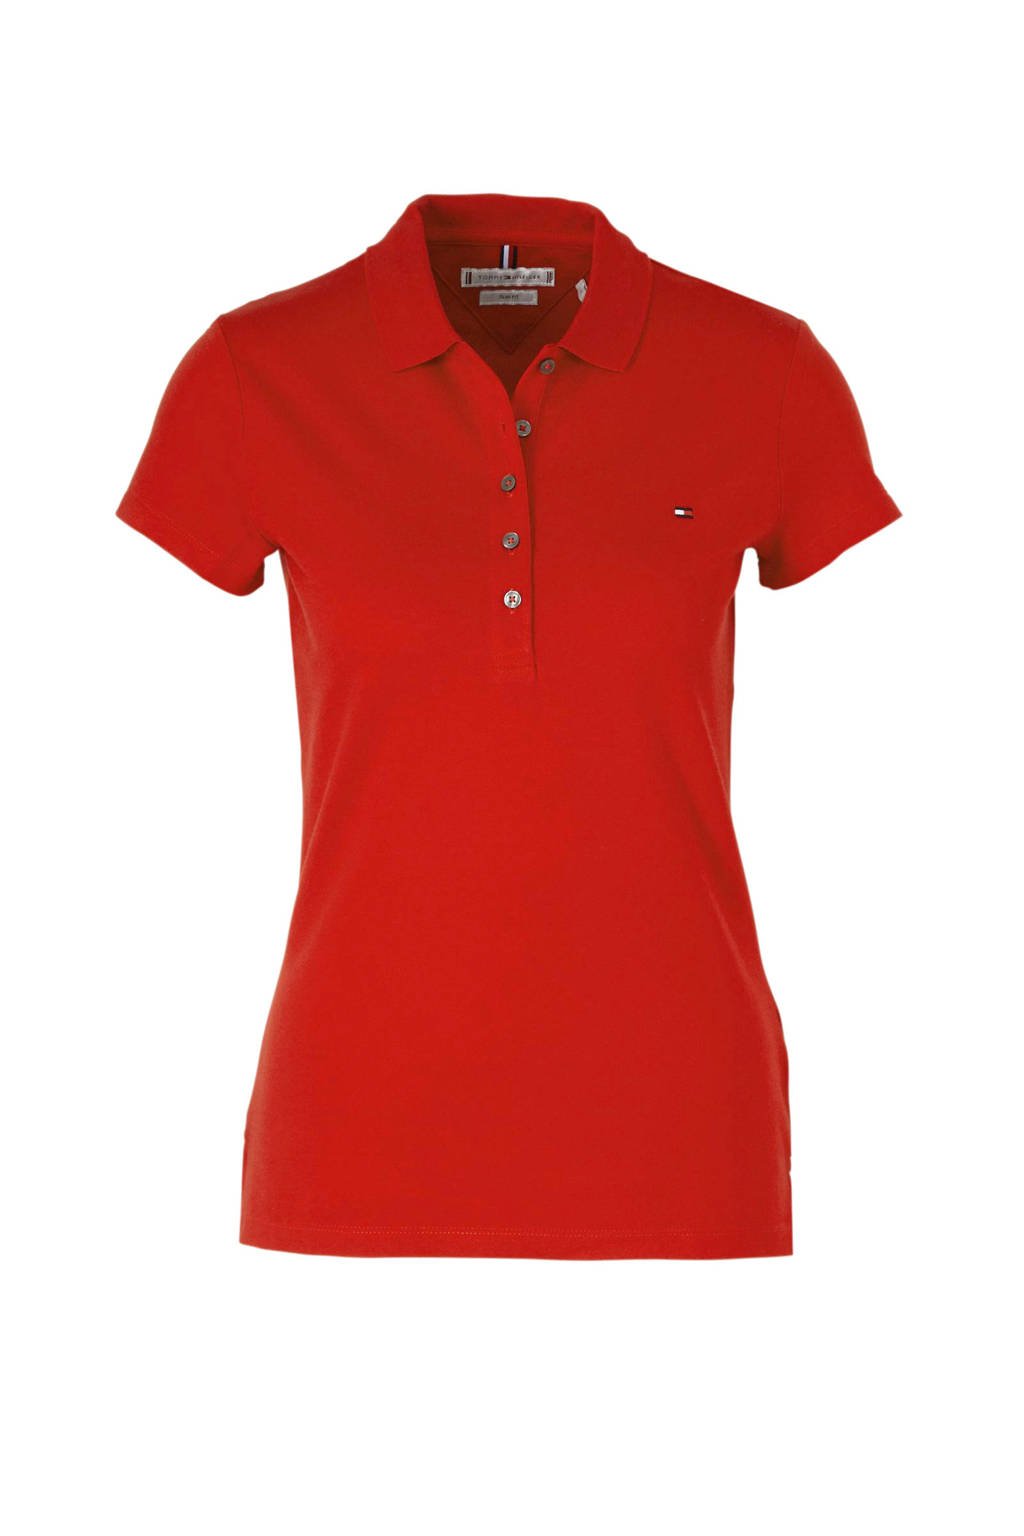 Tommy Hilfiger polo slim fit rood wehkamp